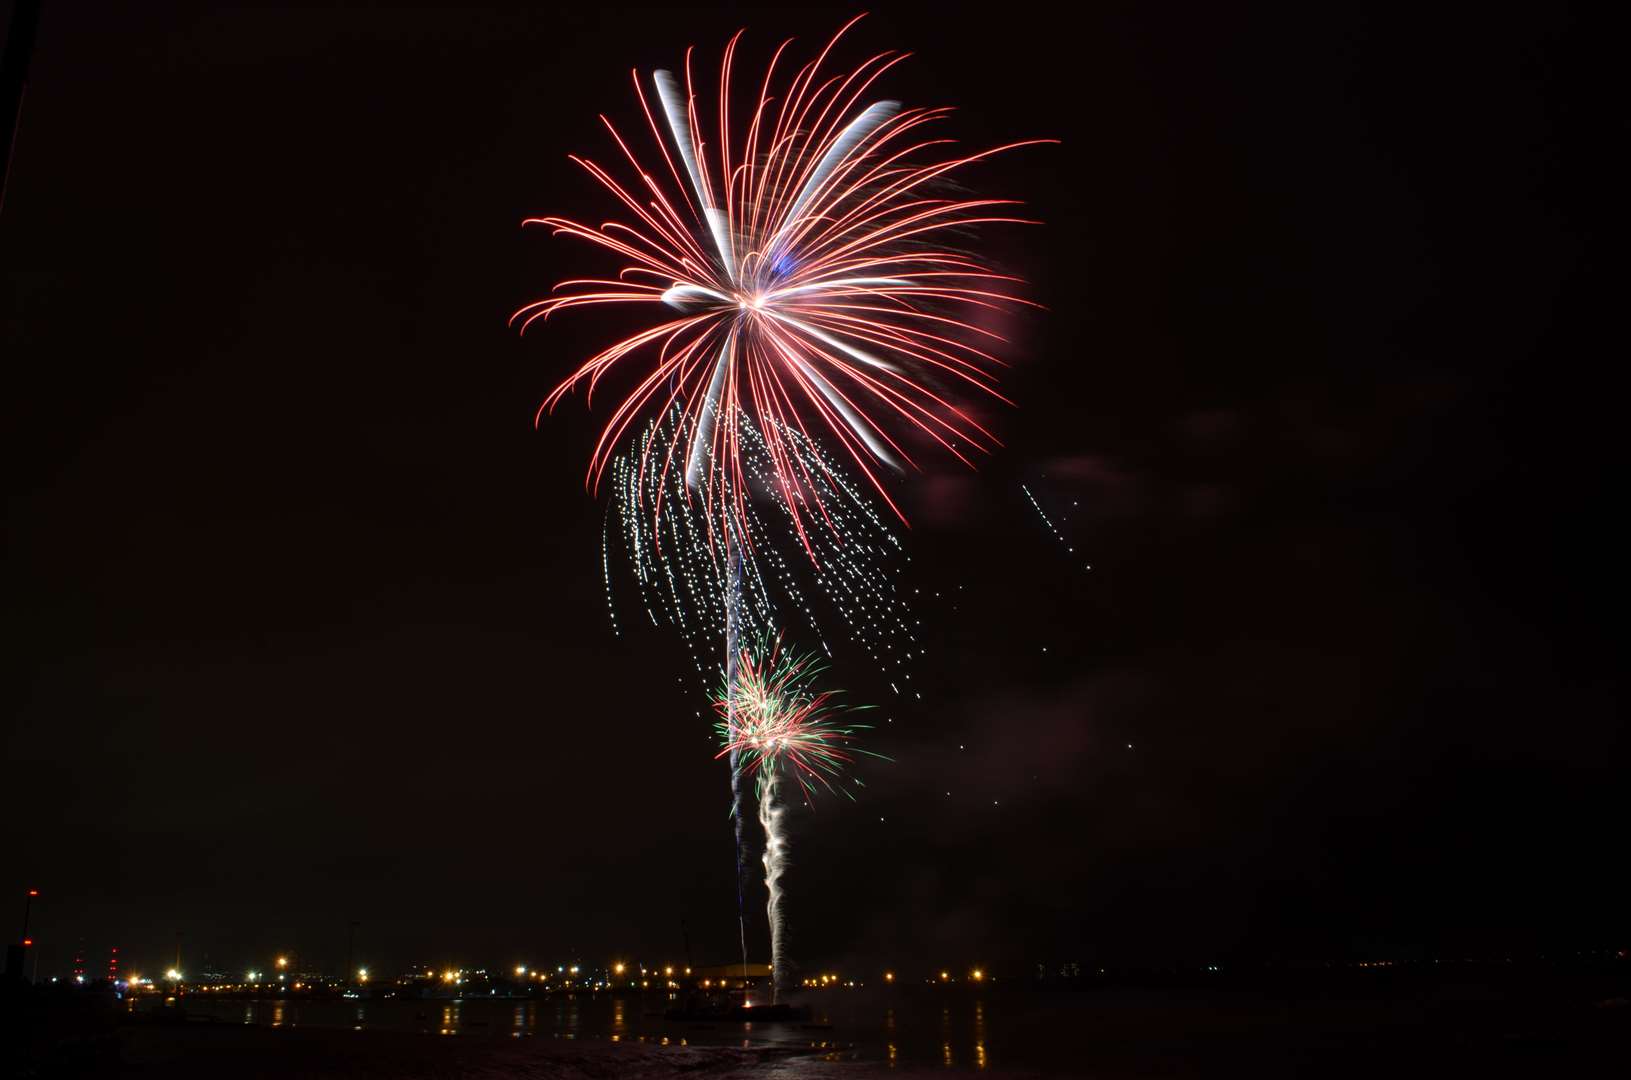 The Gravesend riverside fireworks show went off with a bang last year. Photo: Jason Arthur